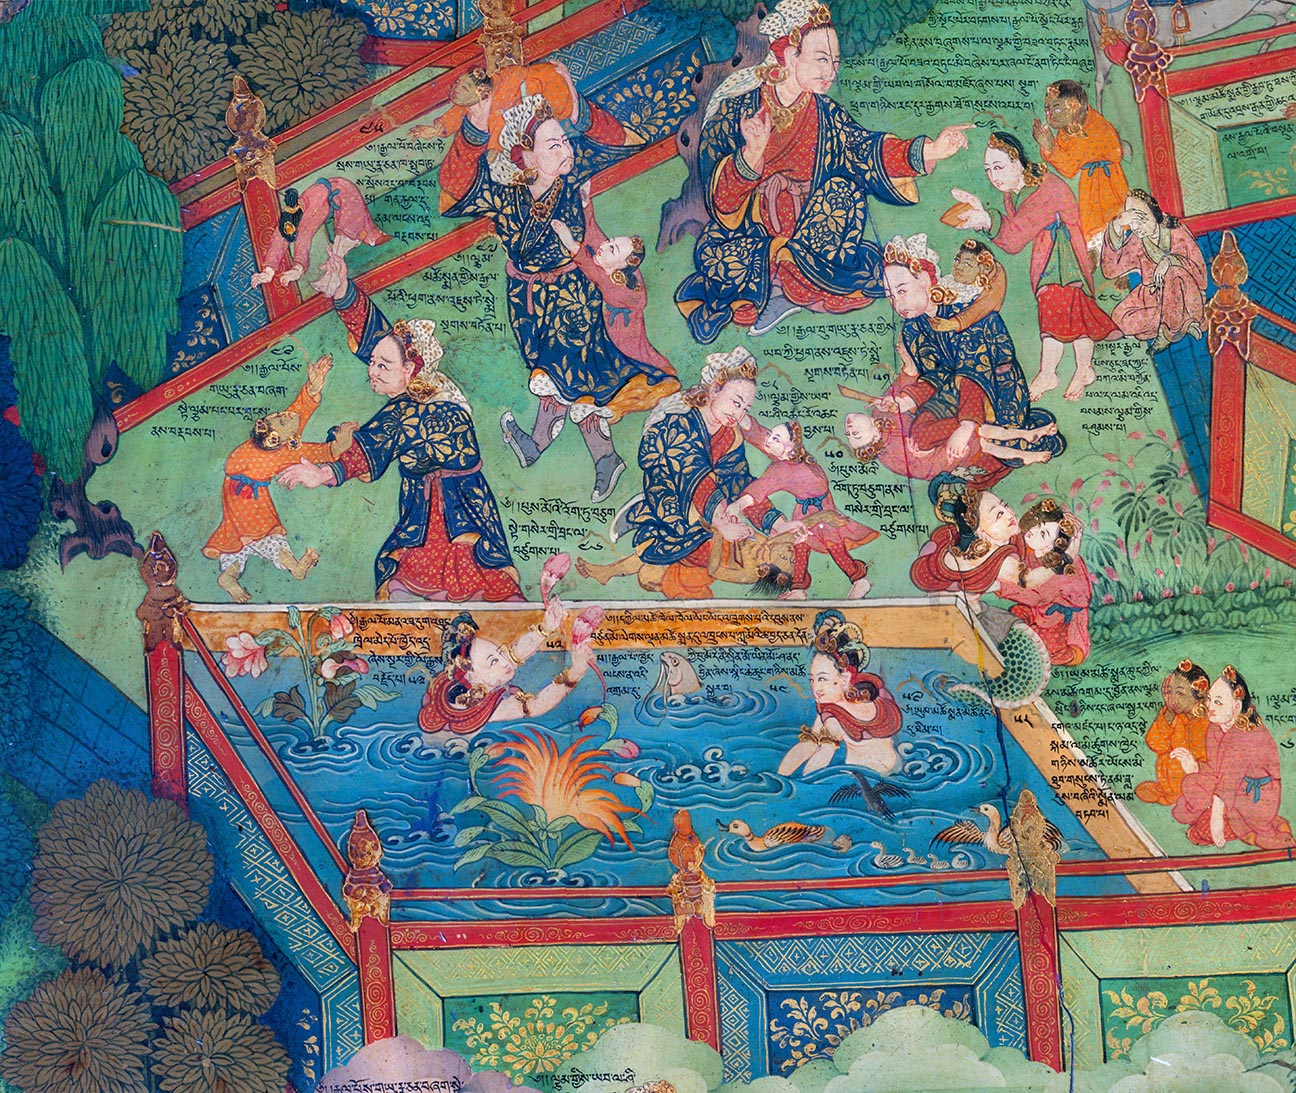 Mural depicting pool of water inhabited by snake deities surrounded by playing and dancing adults and children